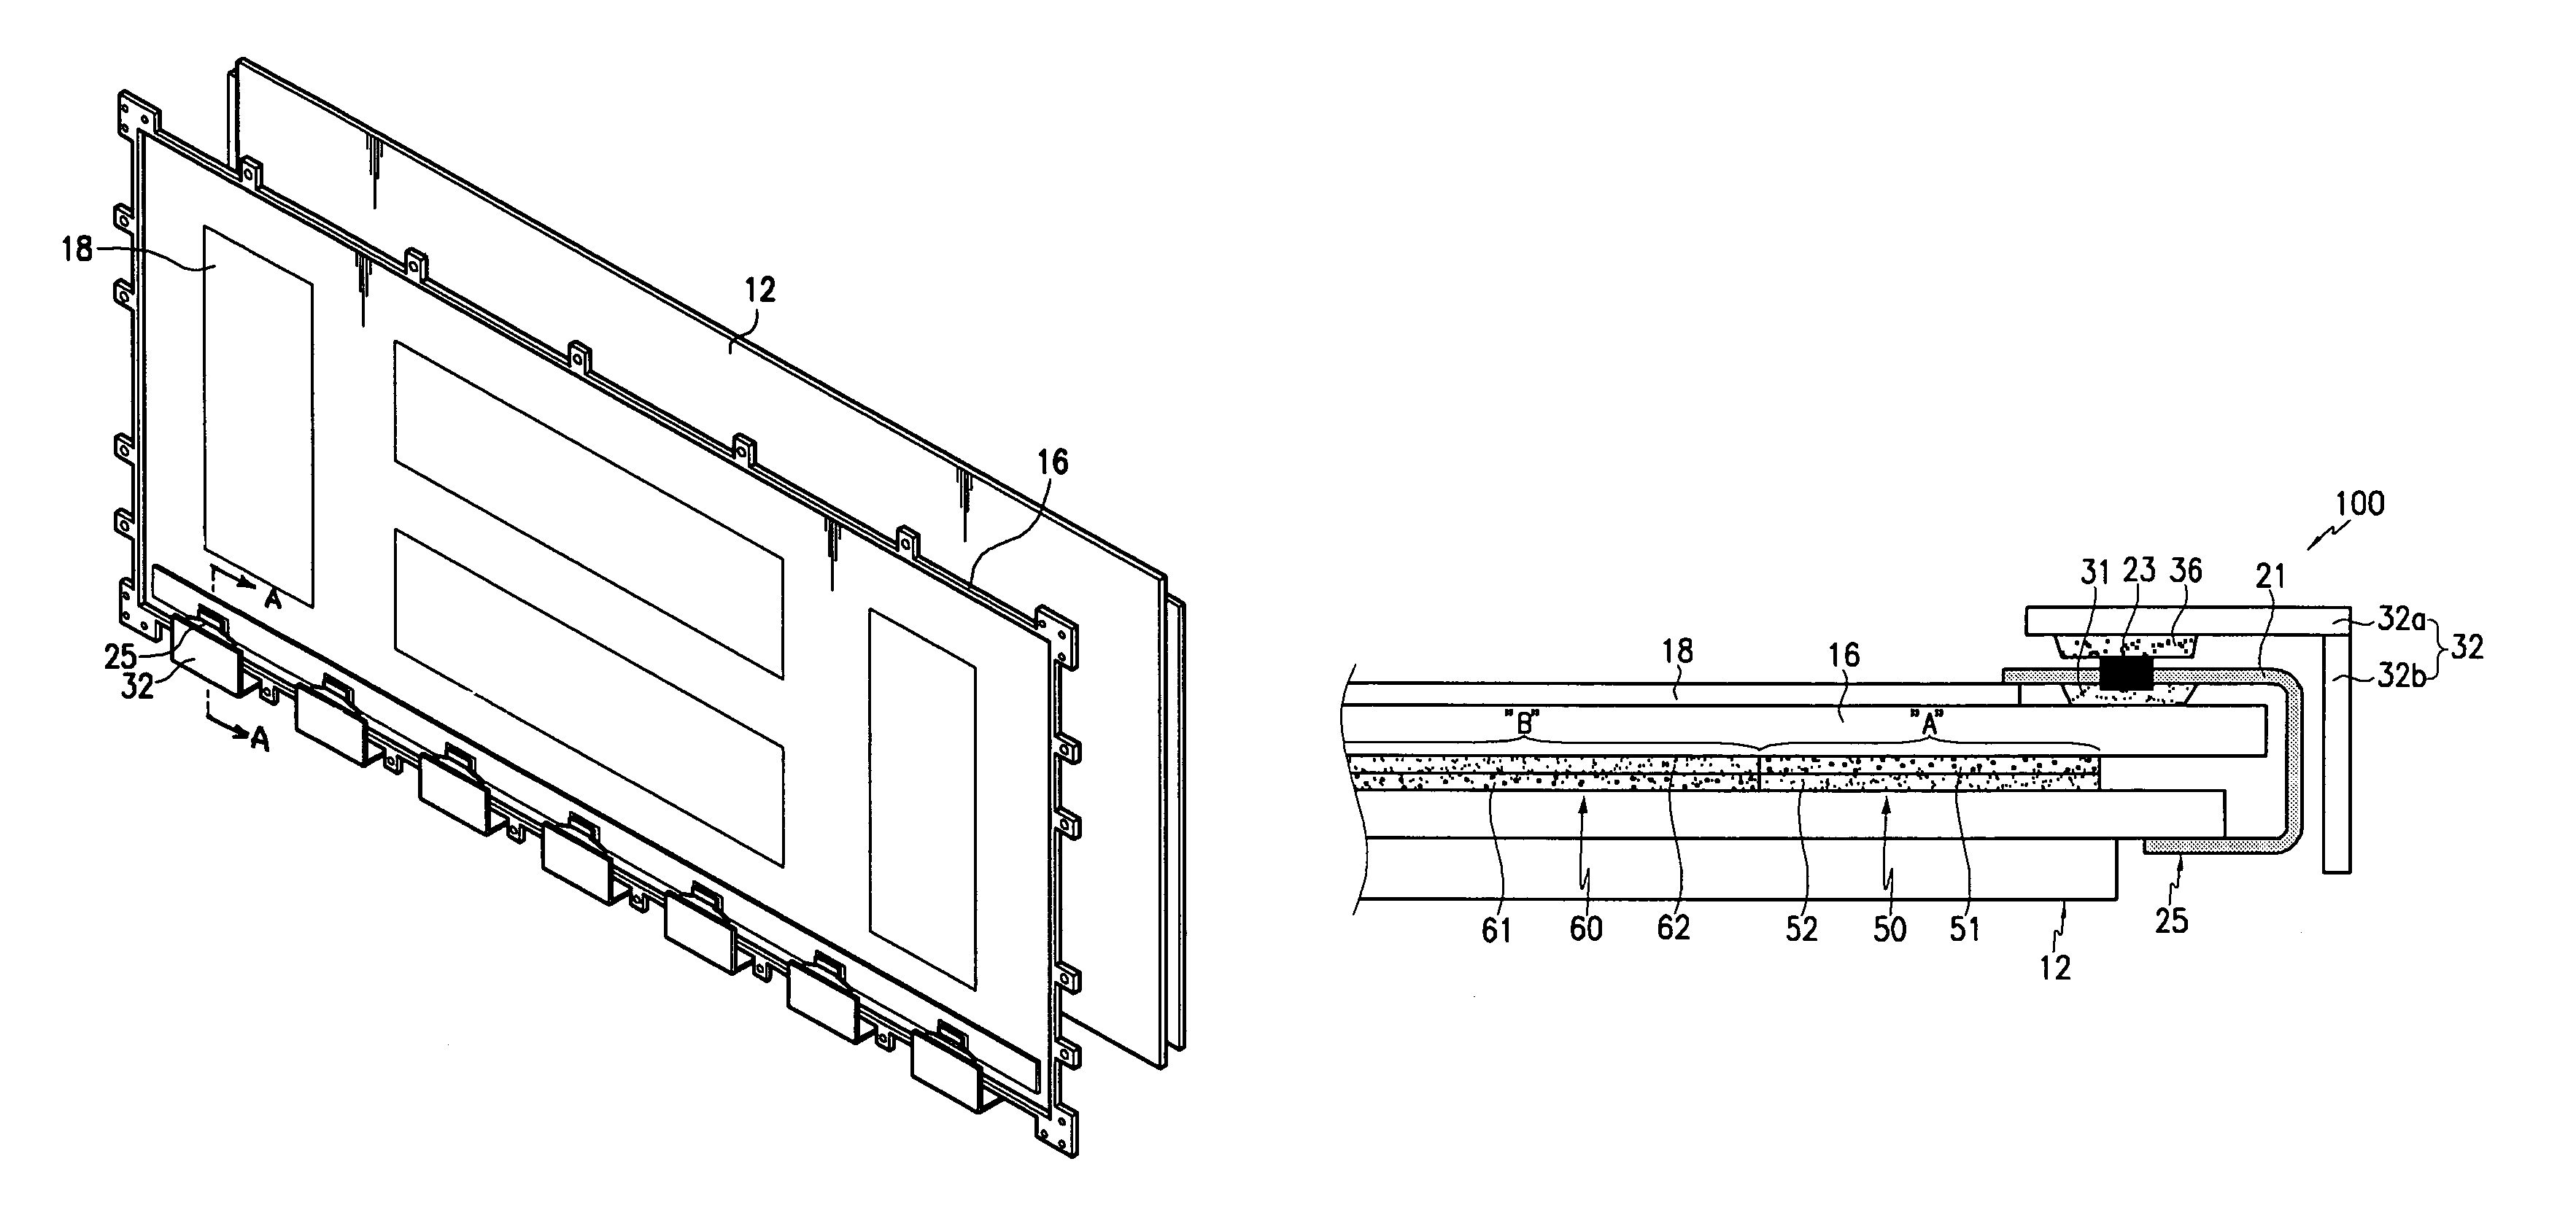 Heat dissipating apparatus for plasma display device